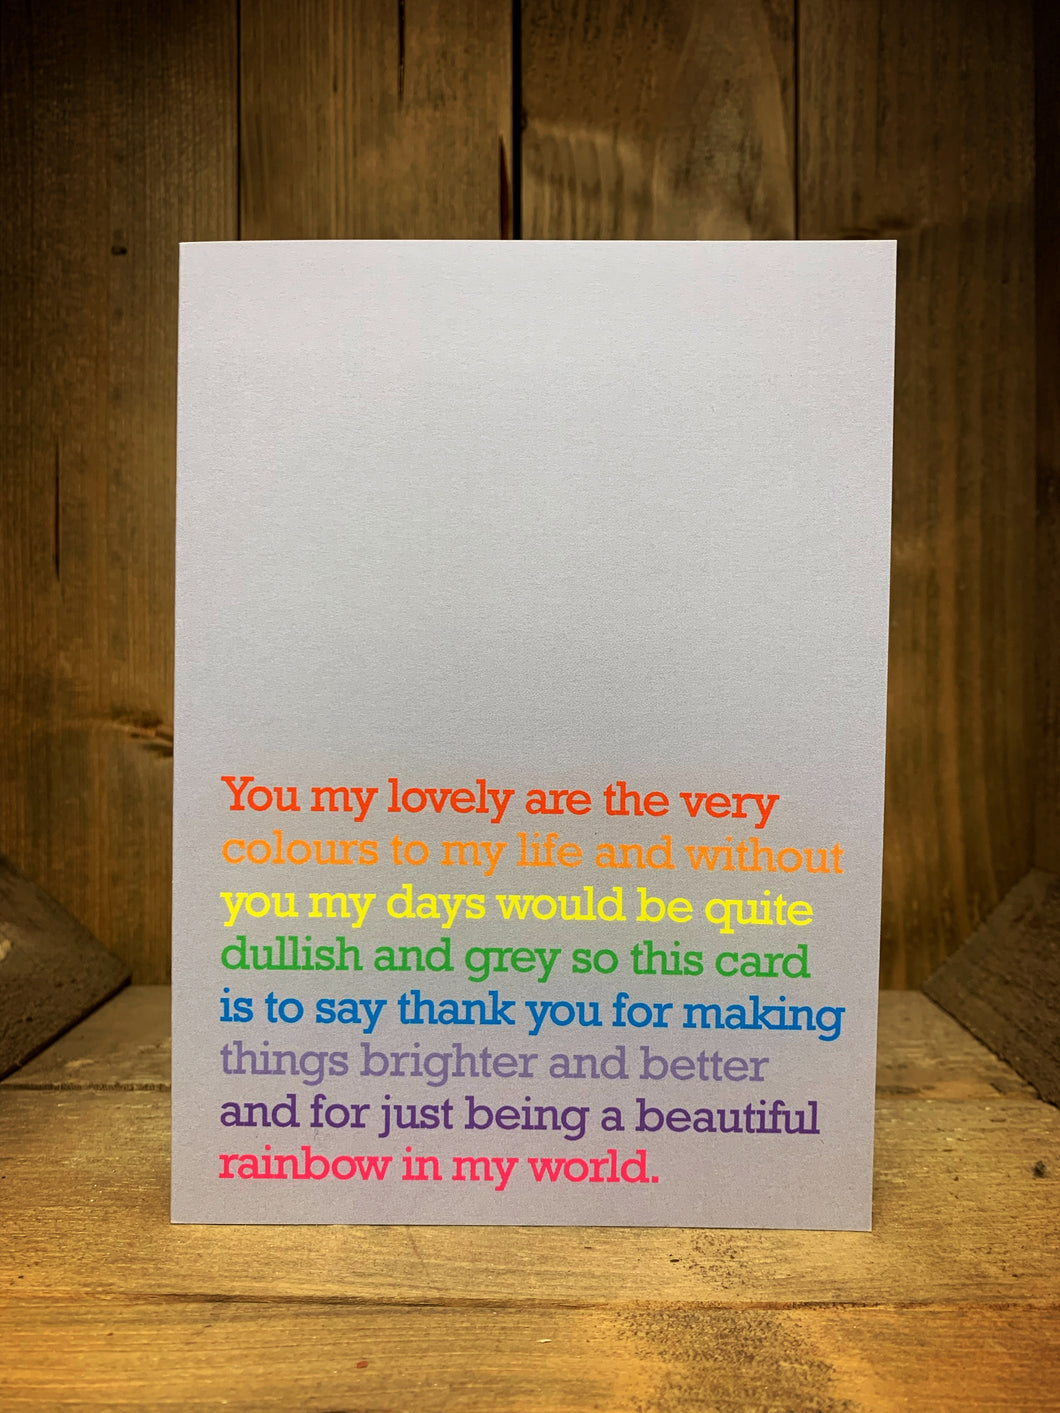 Image of the light grey coloured greetings card with a rainbow typed message on the front reading,' You my lovely are the very colours to my life and without you my days would be quite dullish and grey so this card is to say thank you for making things brighter and better and for just being a wonderful rainbow in my world.' The text per line varies from red, orange, yellow, green, blue, lavender, purple and pink with the inside left blank.